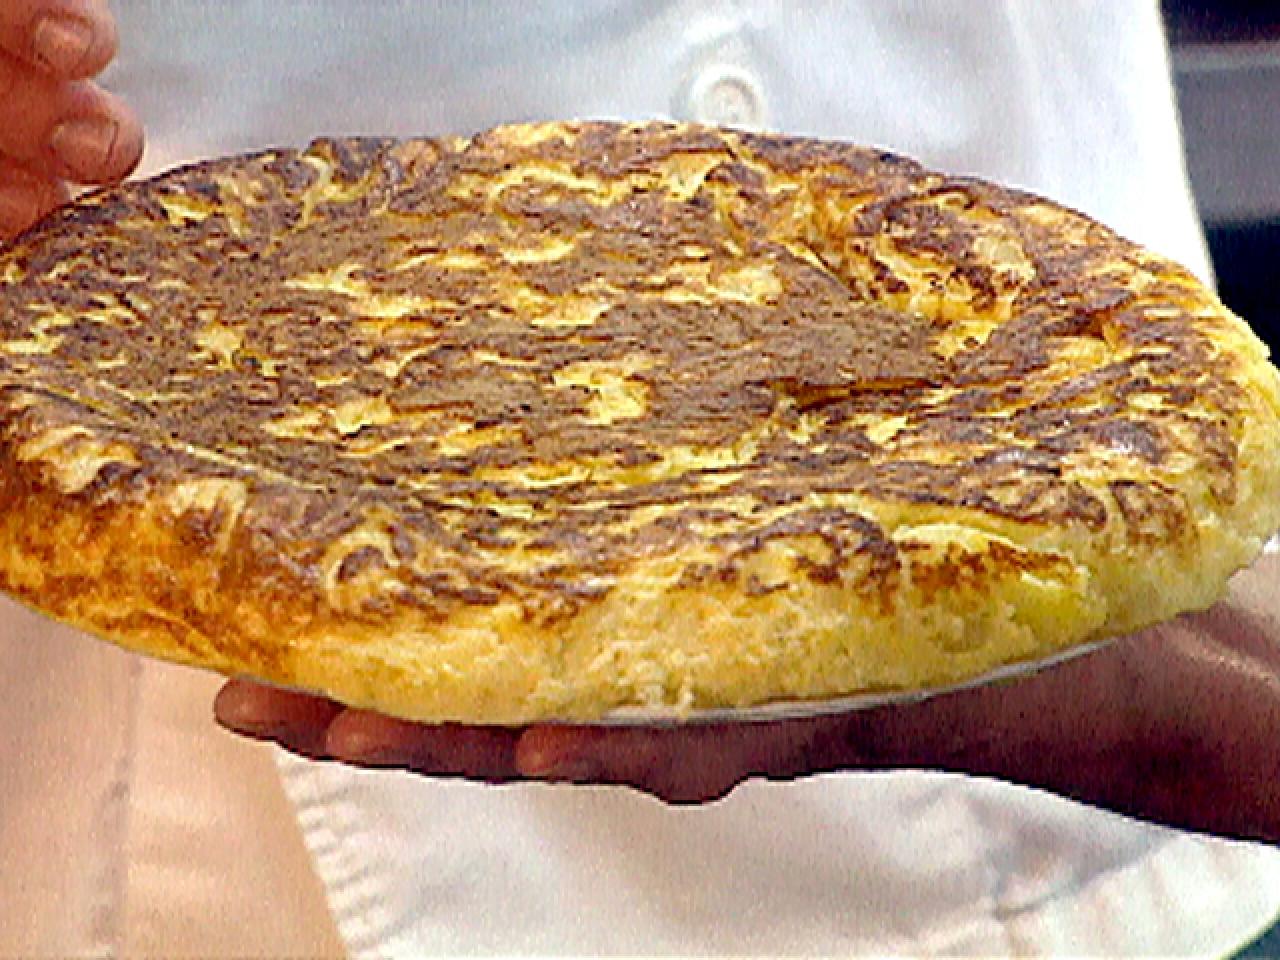 Spanish Tortilla Recipe: Trials, Errors, and Getting It Right - FOODICLES